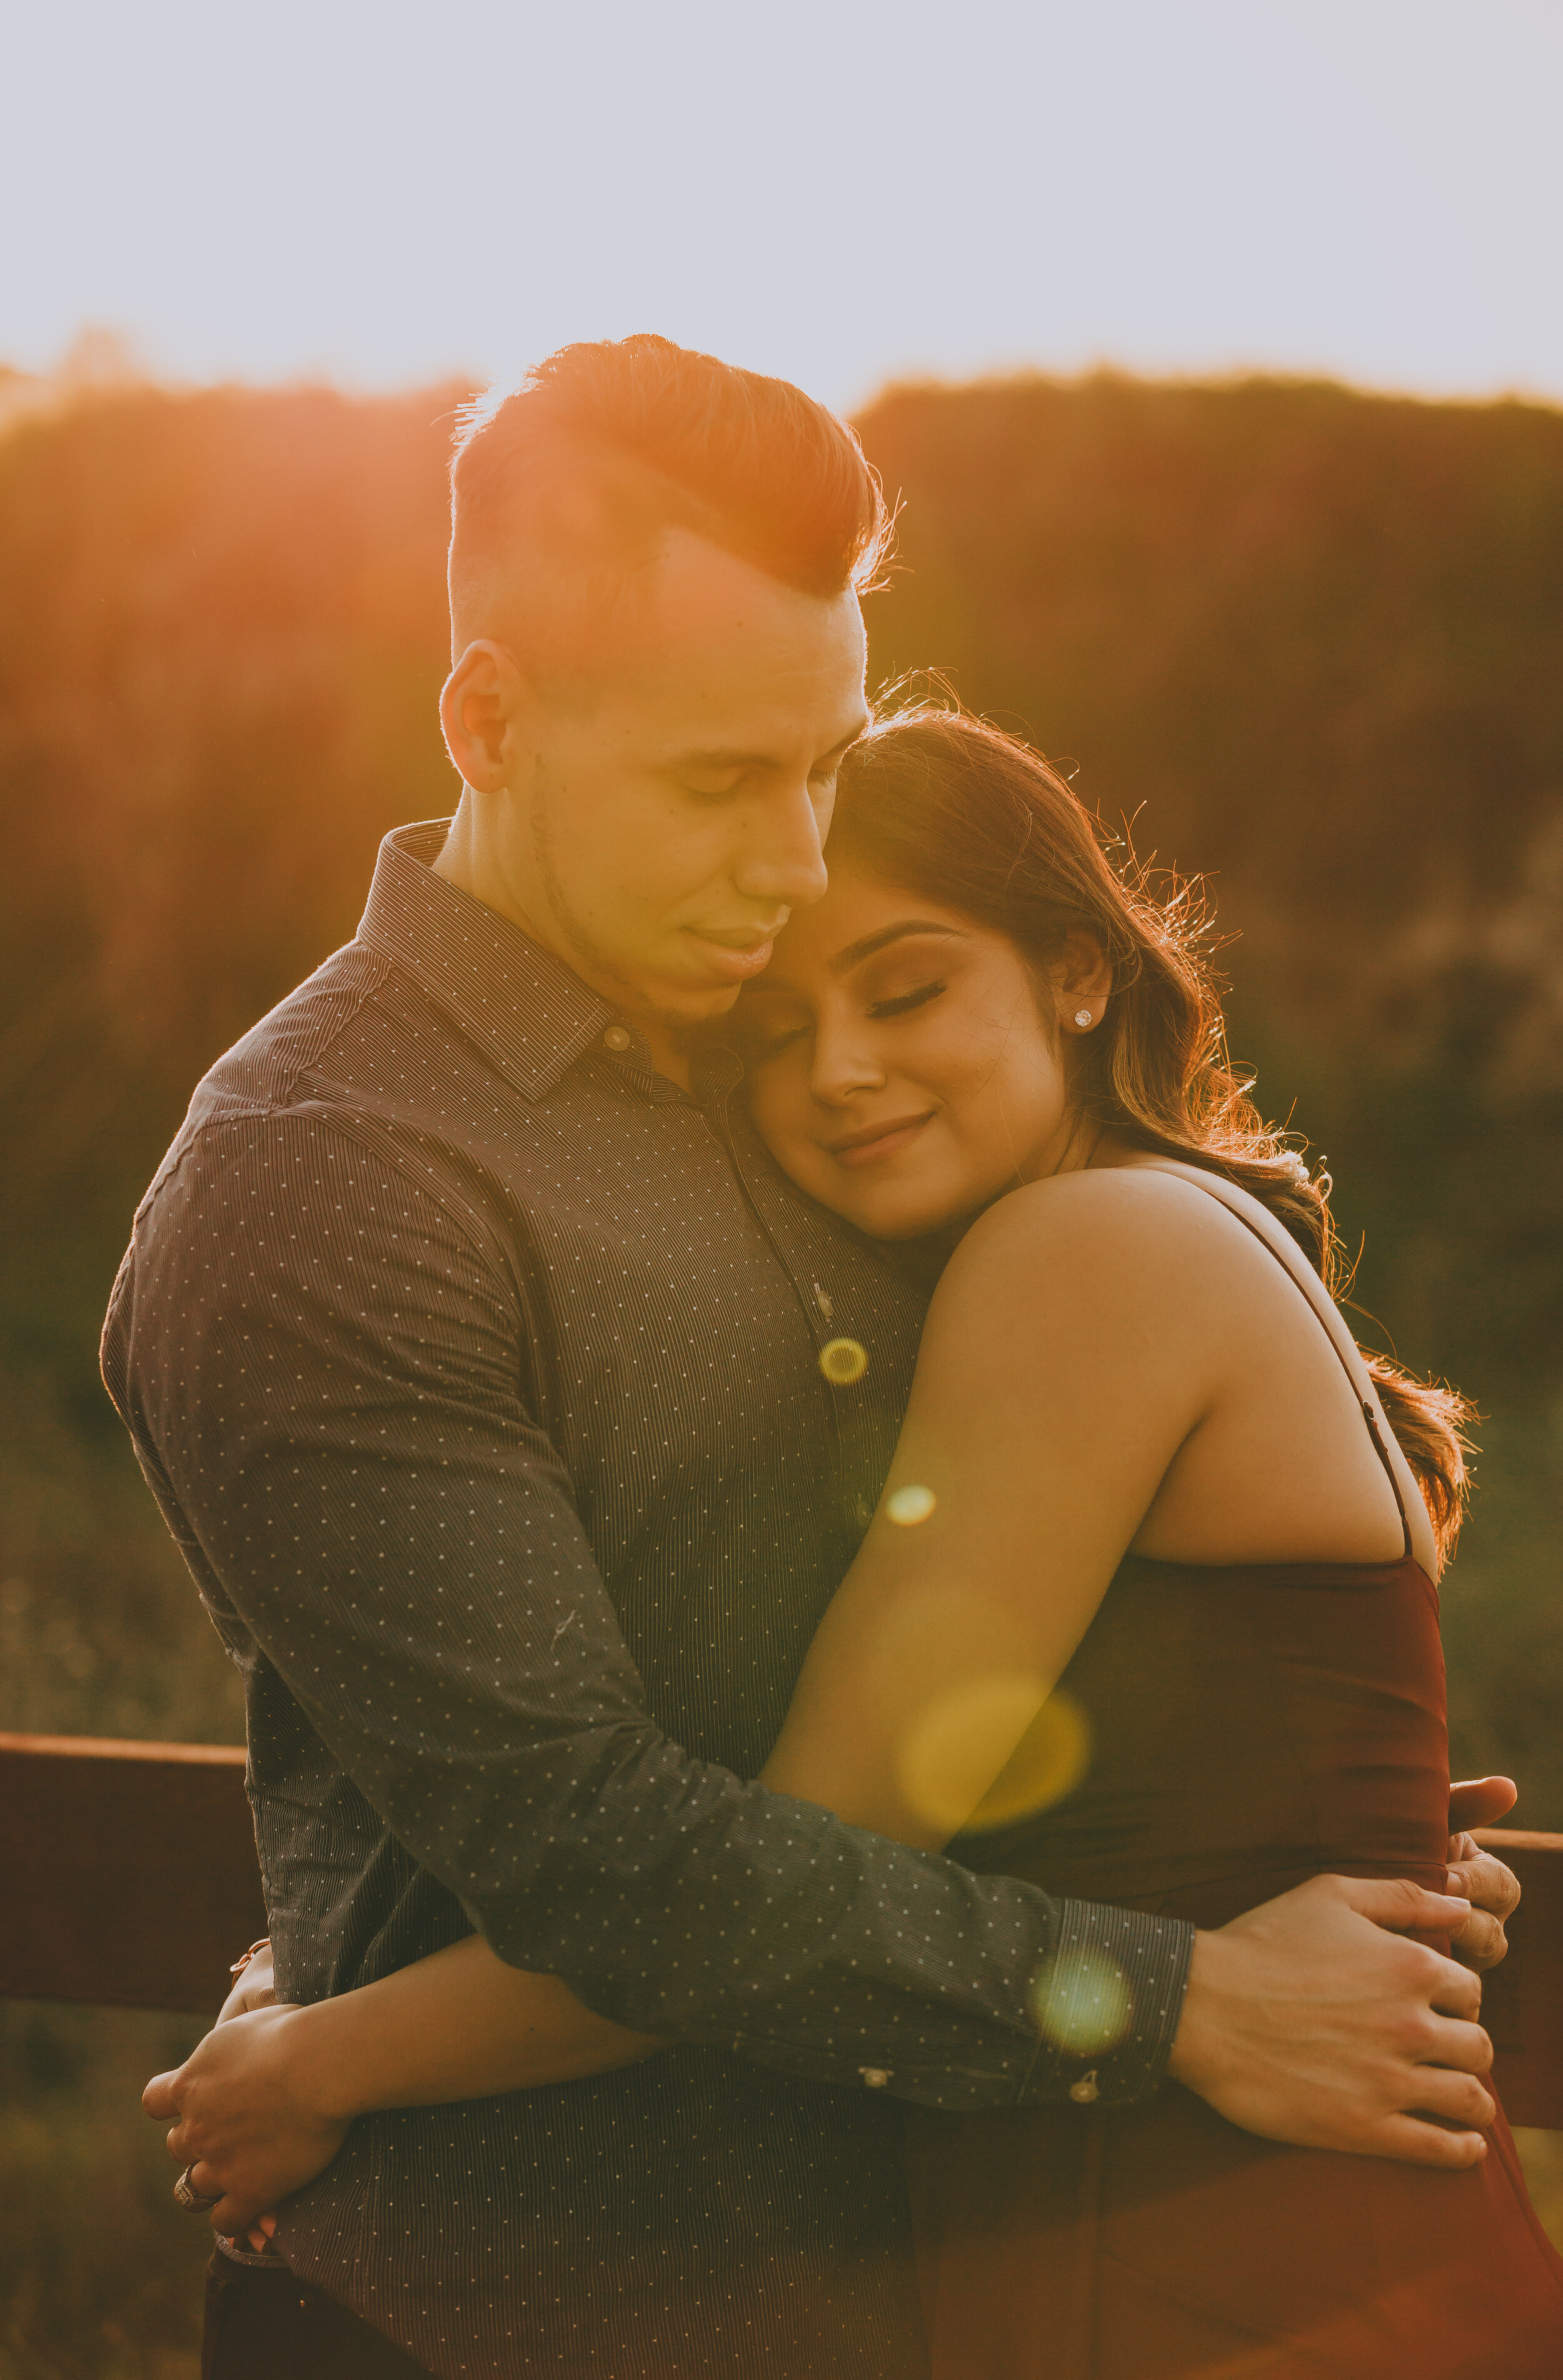 Fresno Engagament Photos - The Clausen Gallery - Samantha and Jesus-37.jpg